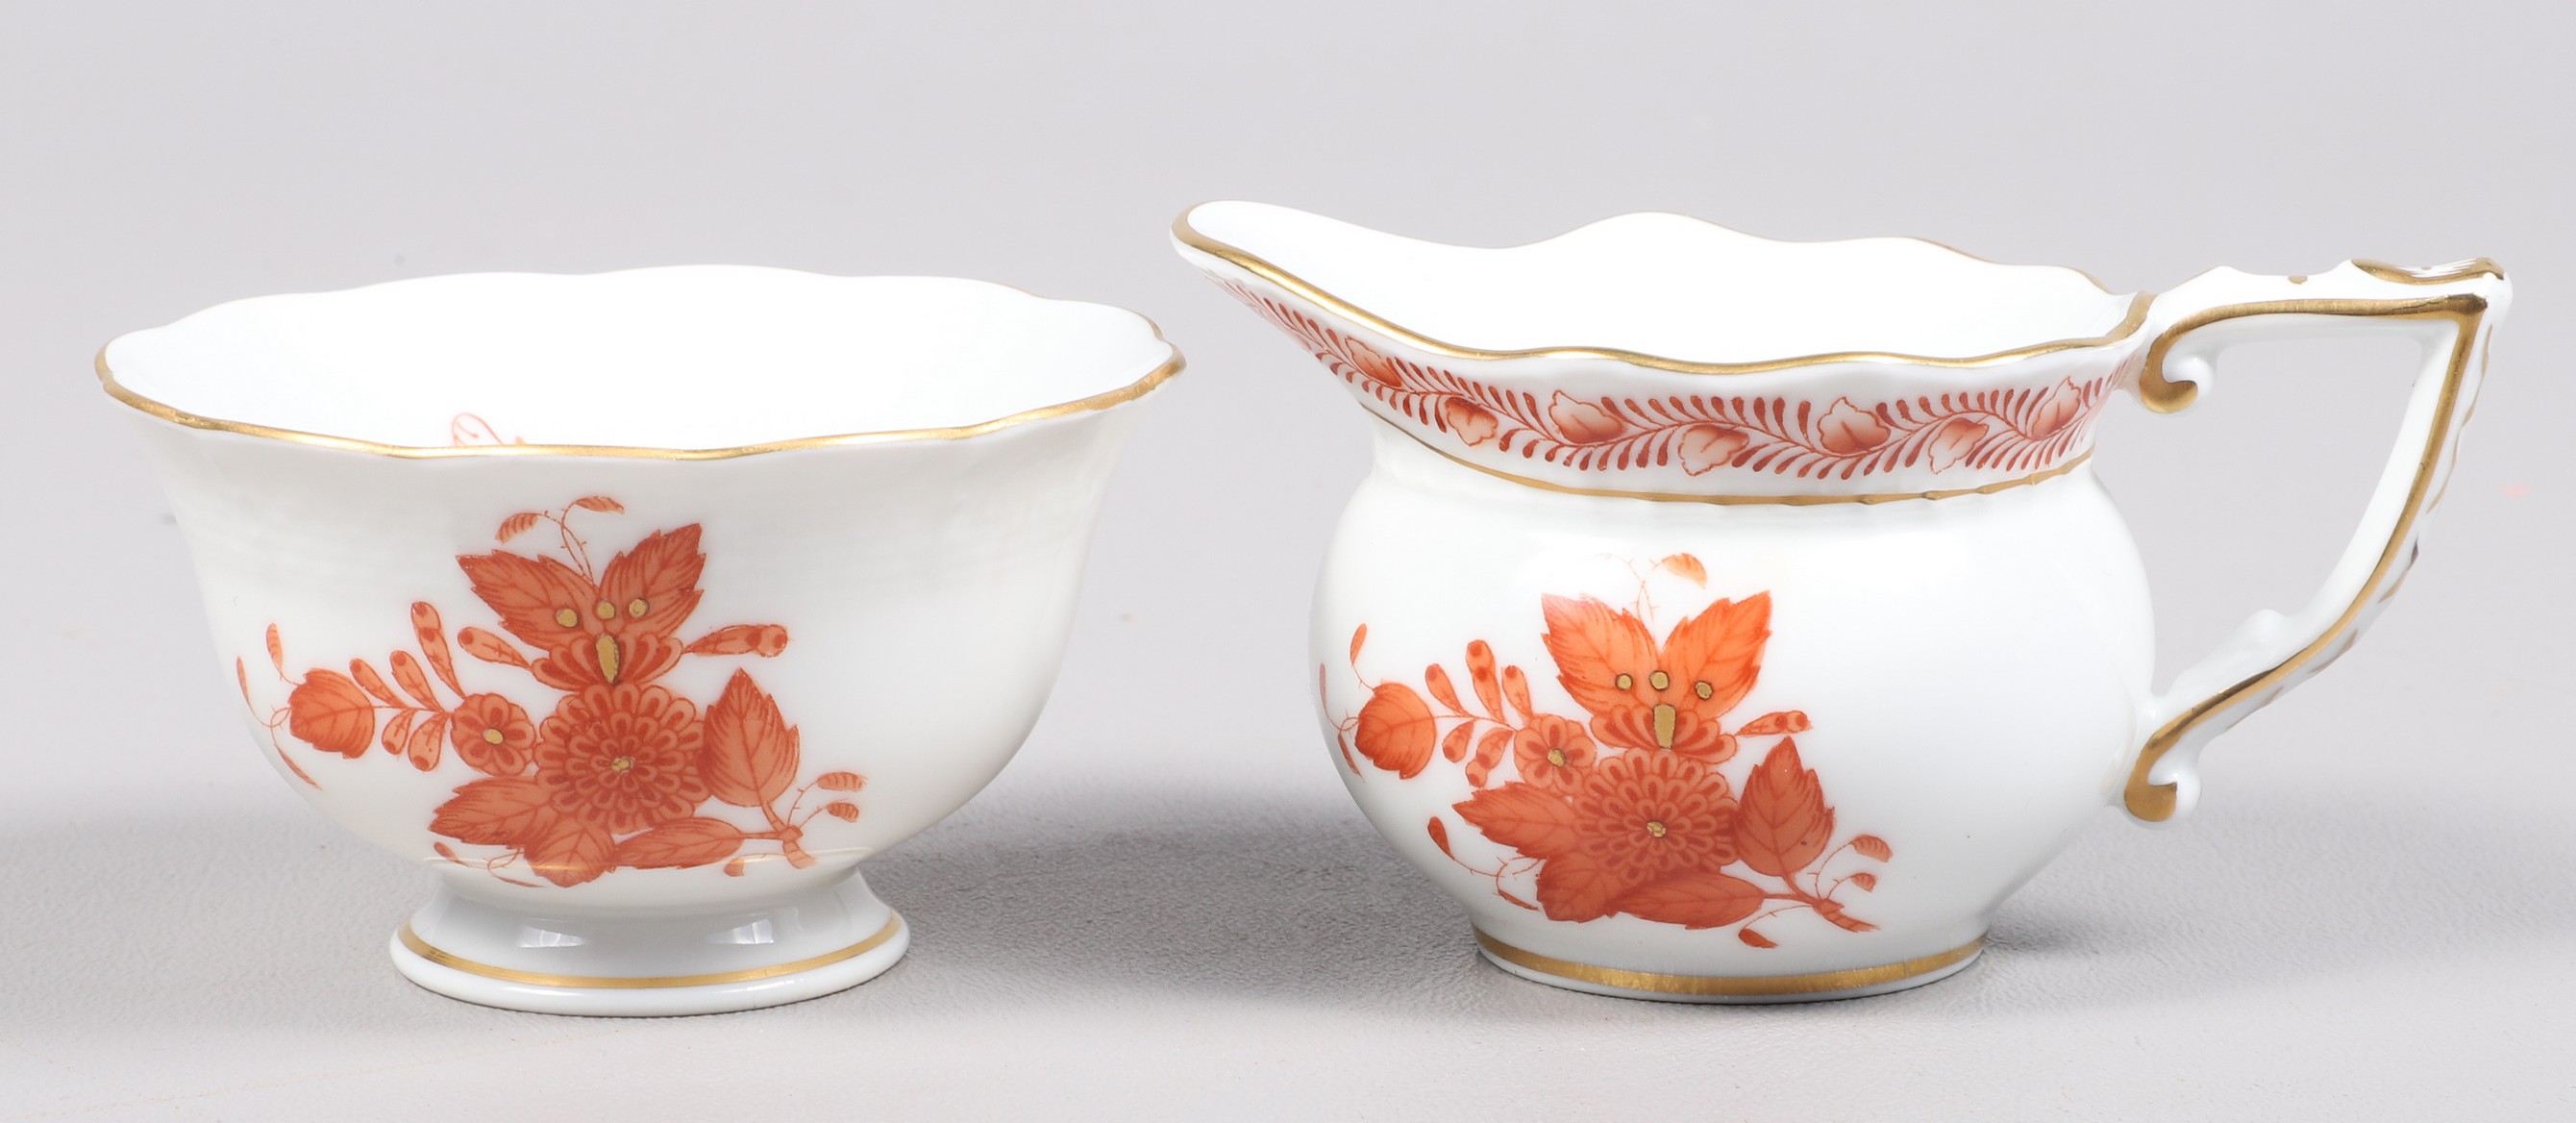  2 Pcs Herend porcelain Chinese 2e1348